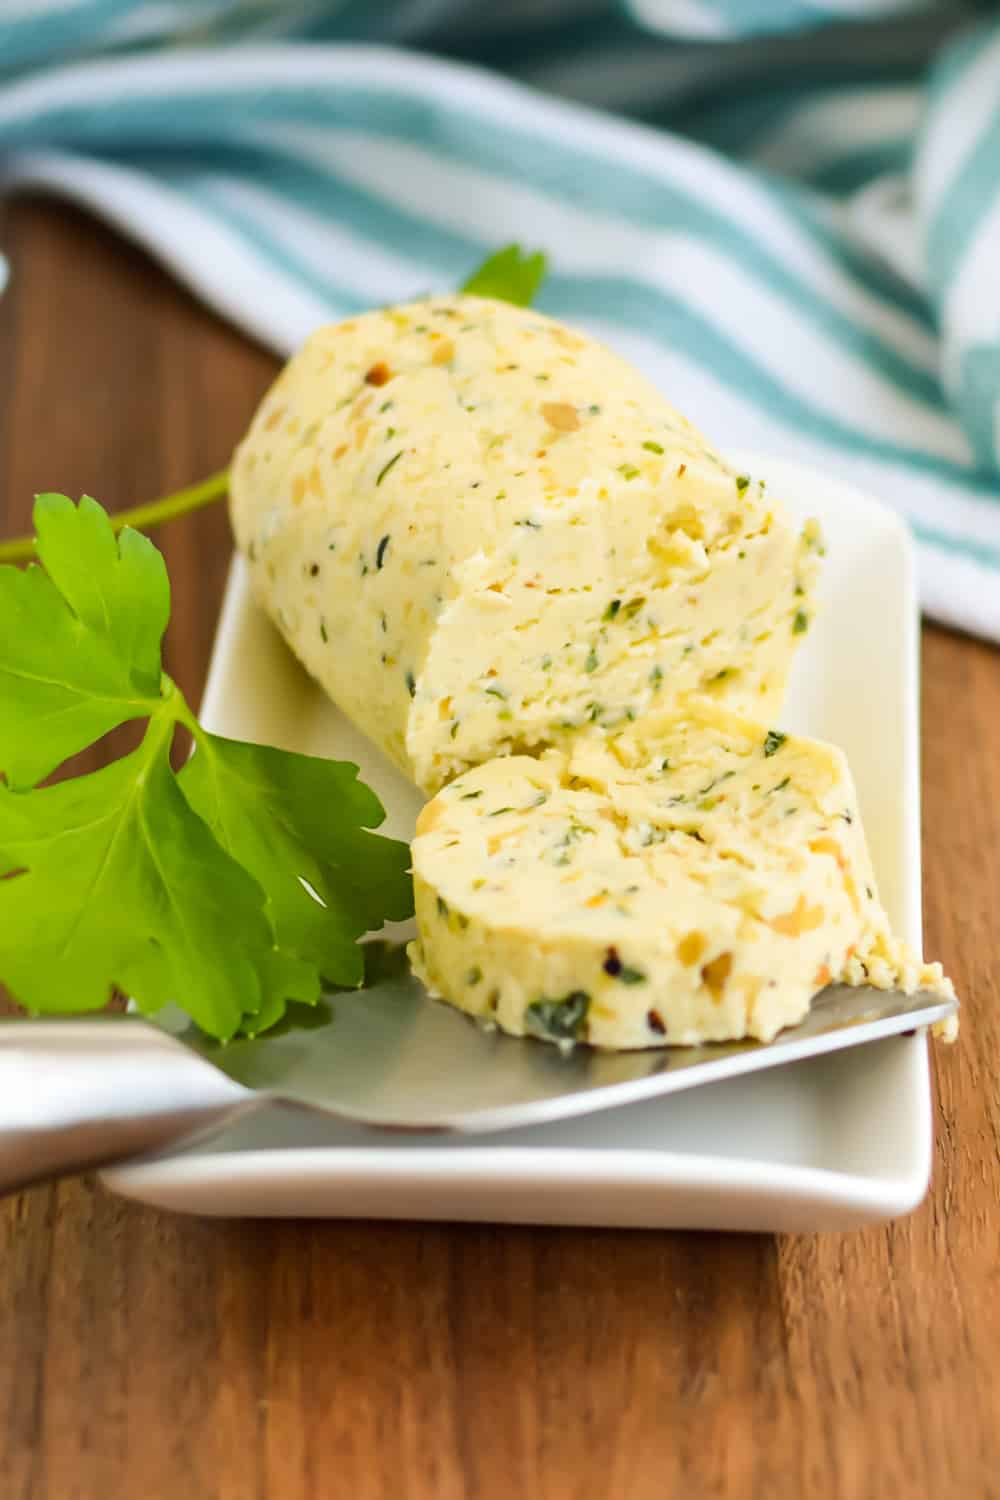 If you love making delicious, savory compound butter at home, you have to give this copycat Ruth's Chris Steak Butter recipe a try. It's full of fresh garlic, herbs, and spices and comes together so easily. Your steaks will never be the same. via @jugglingactmama